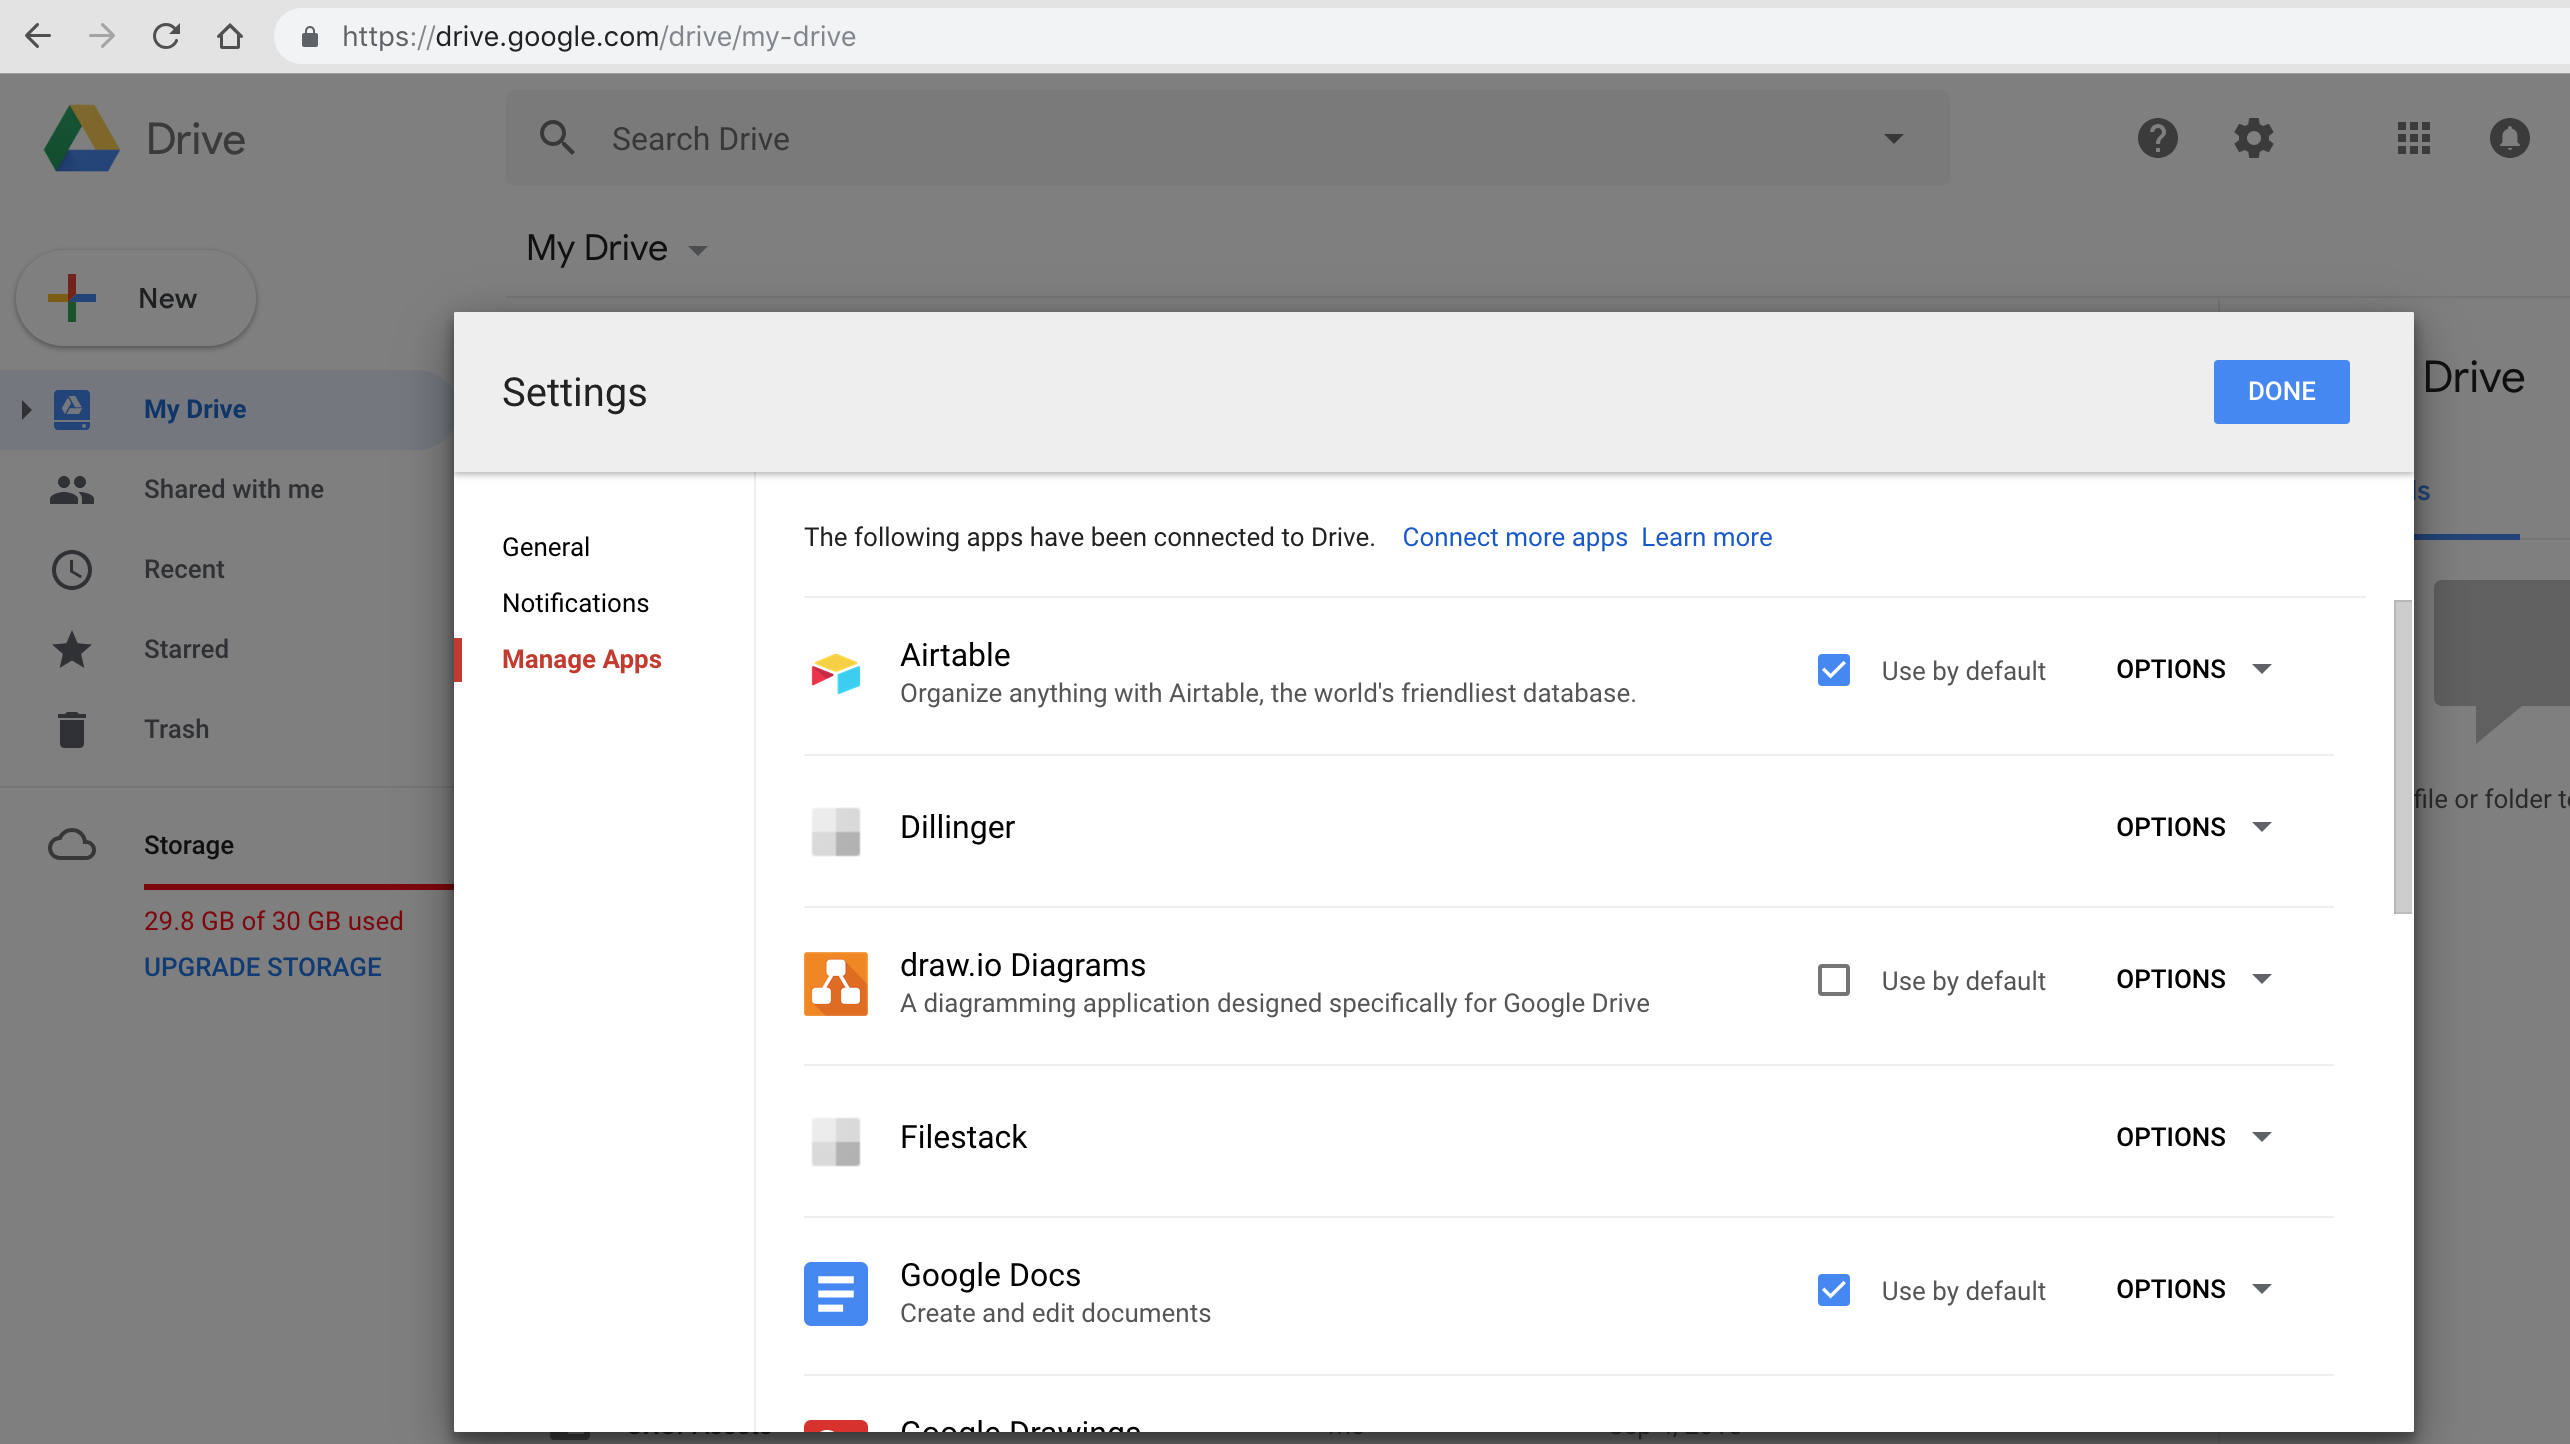 Upload Google Drive files and users will see their authorization of the Filestack app